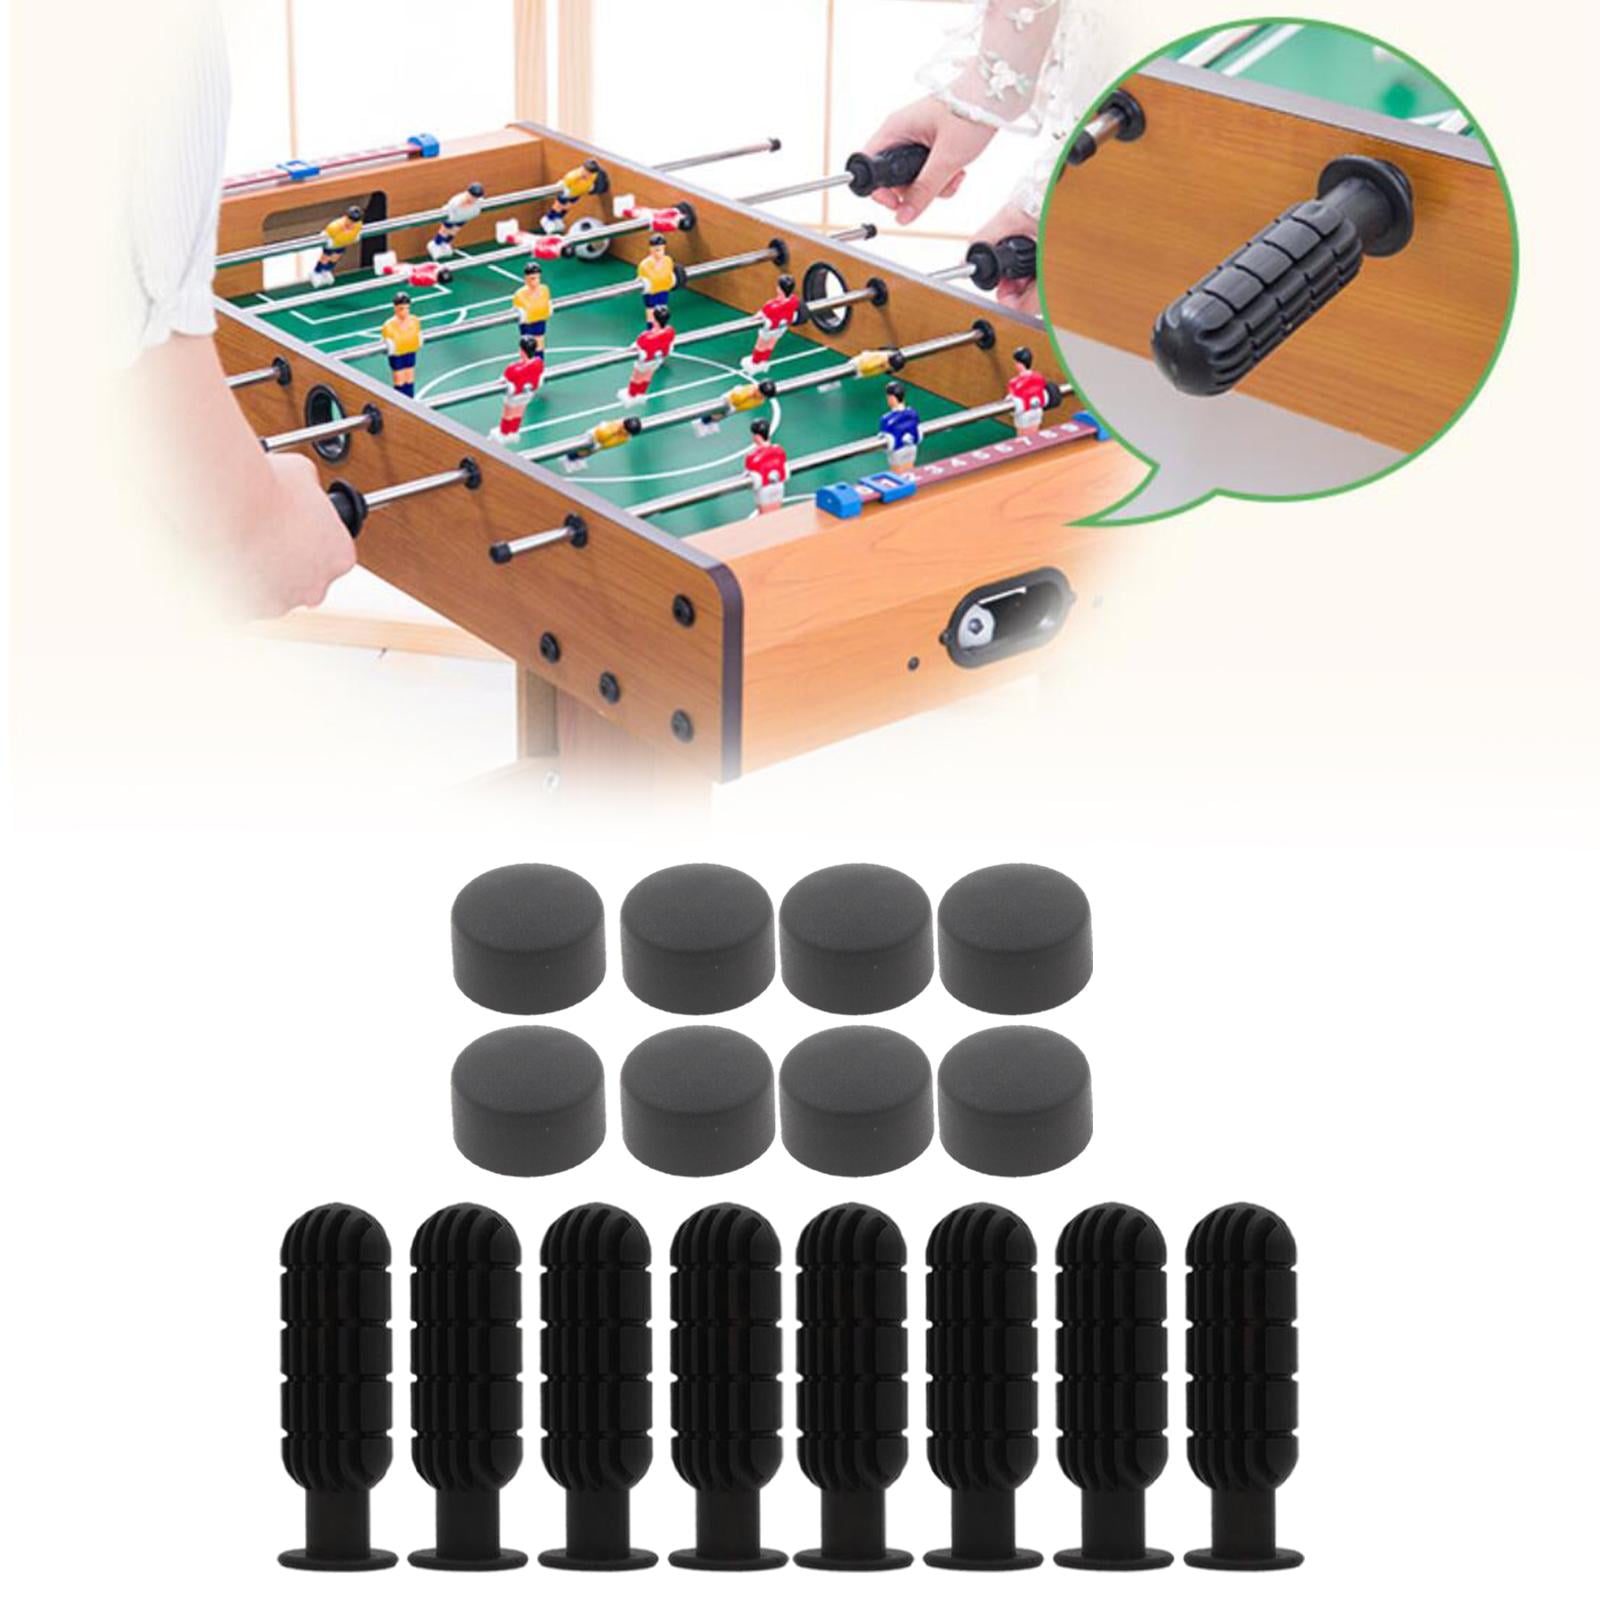 16pcs Caps End Caps With Inner Diameter 14 Mm For Foosball Table Football 